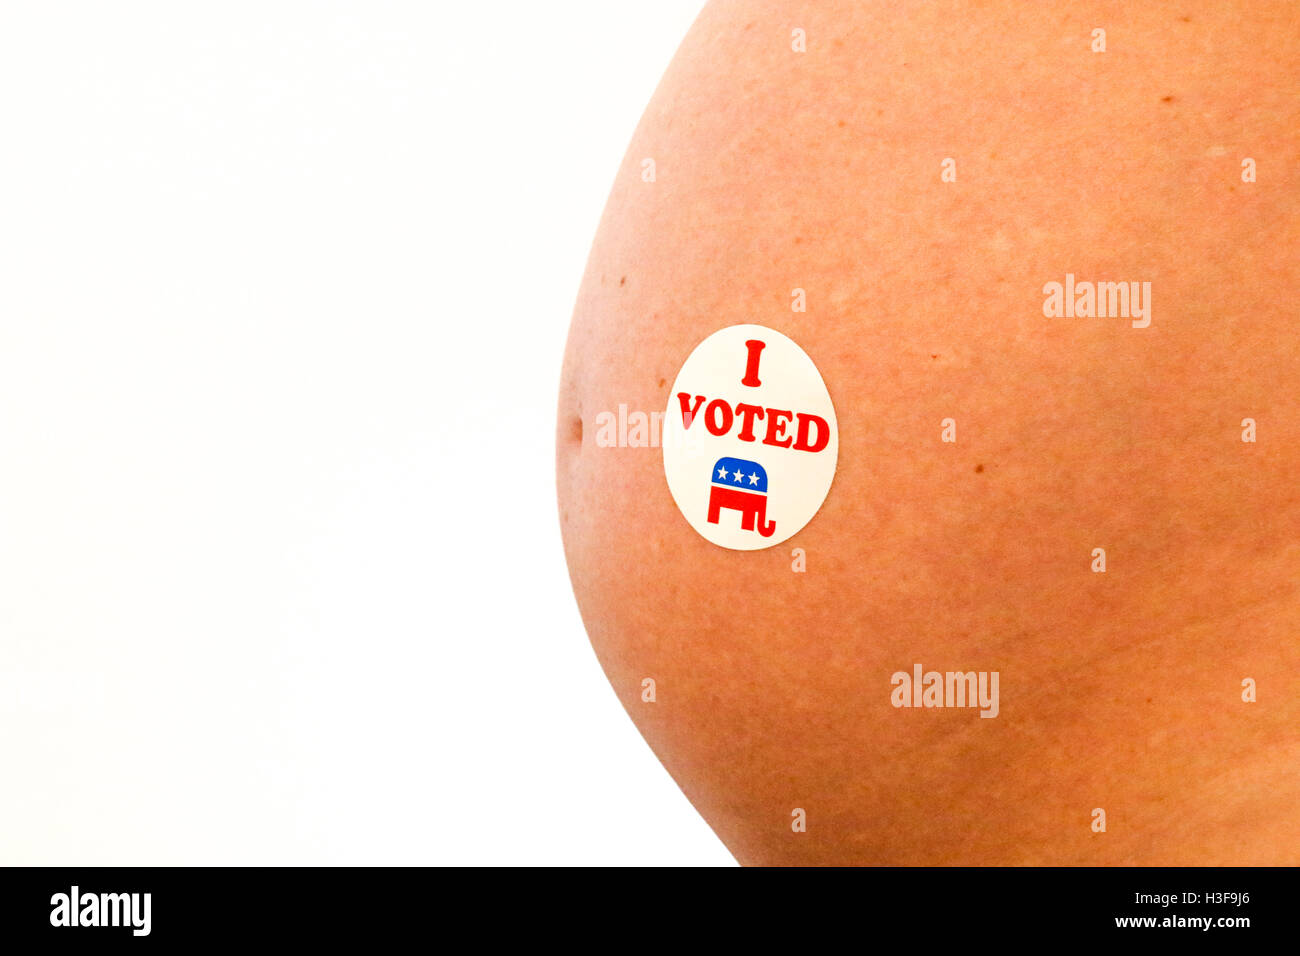 Voting sticker on a pregnant woman Stock Photo